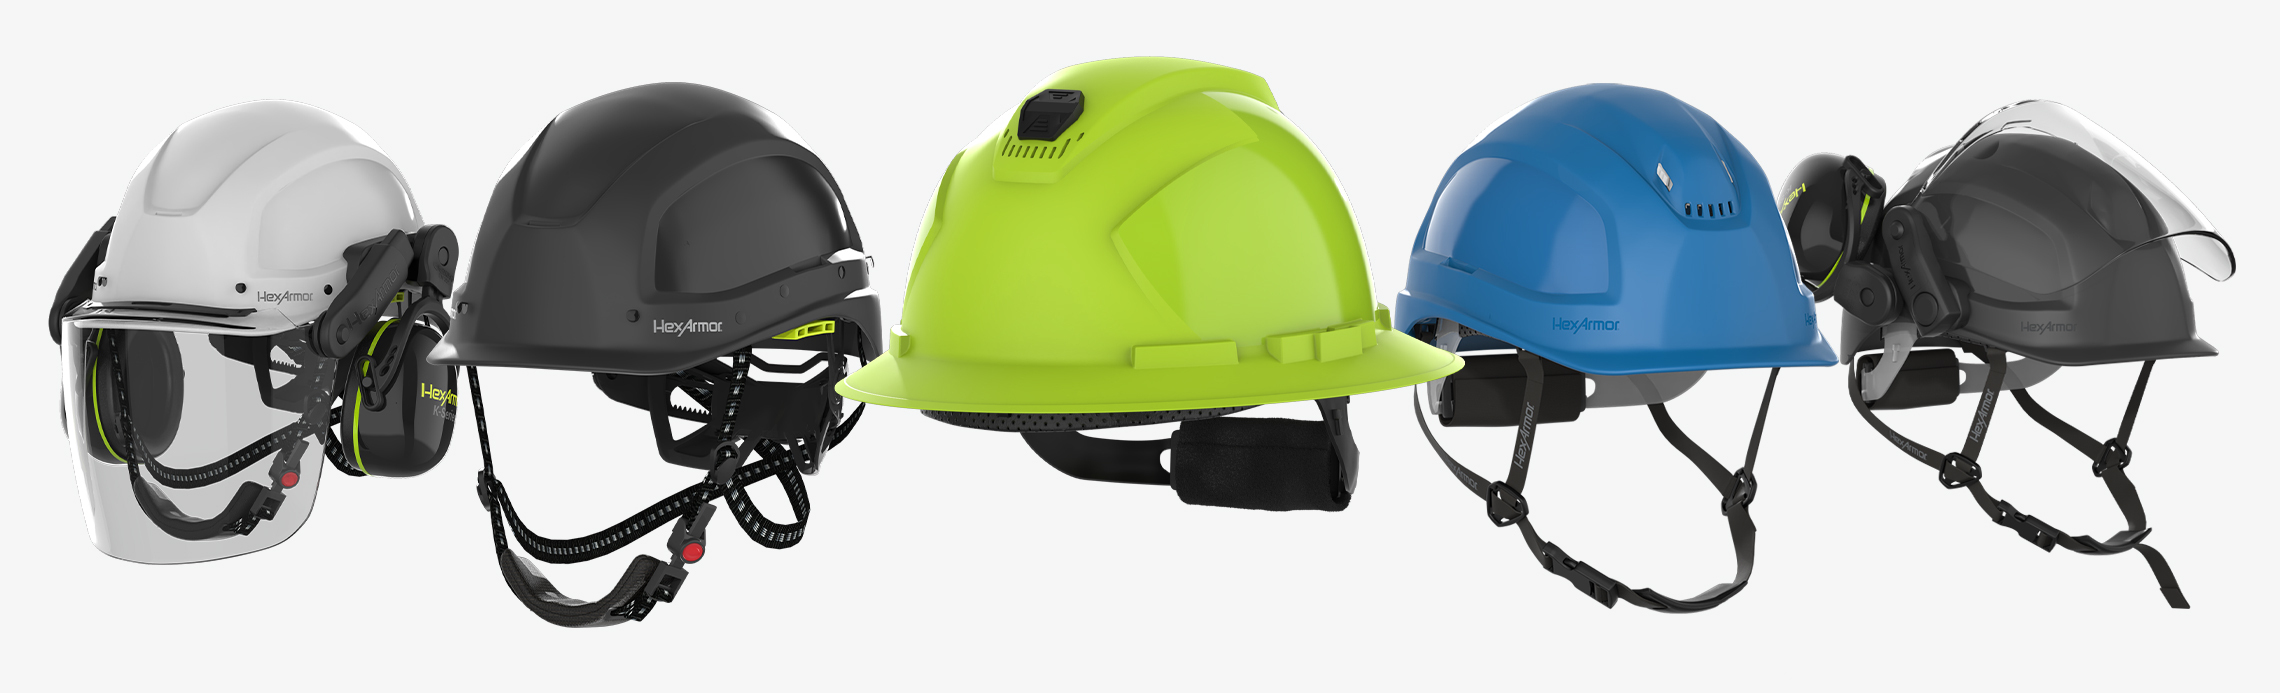 Five HexArmor Ceros safety helmets lined up according to their style, including cap-style, climbing-style, and full brim. Some are complete with accessories.